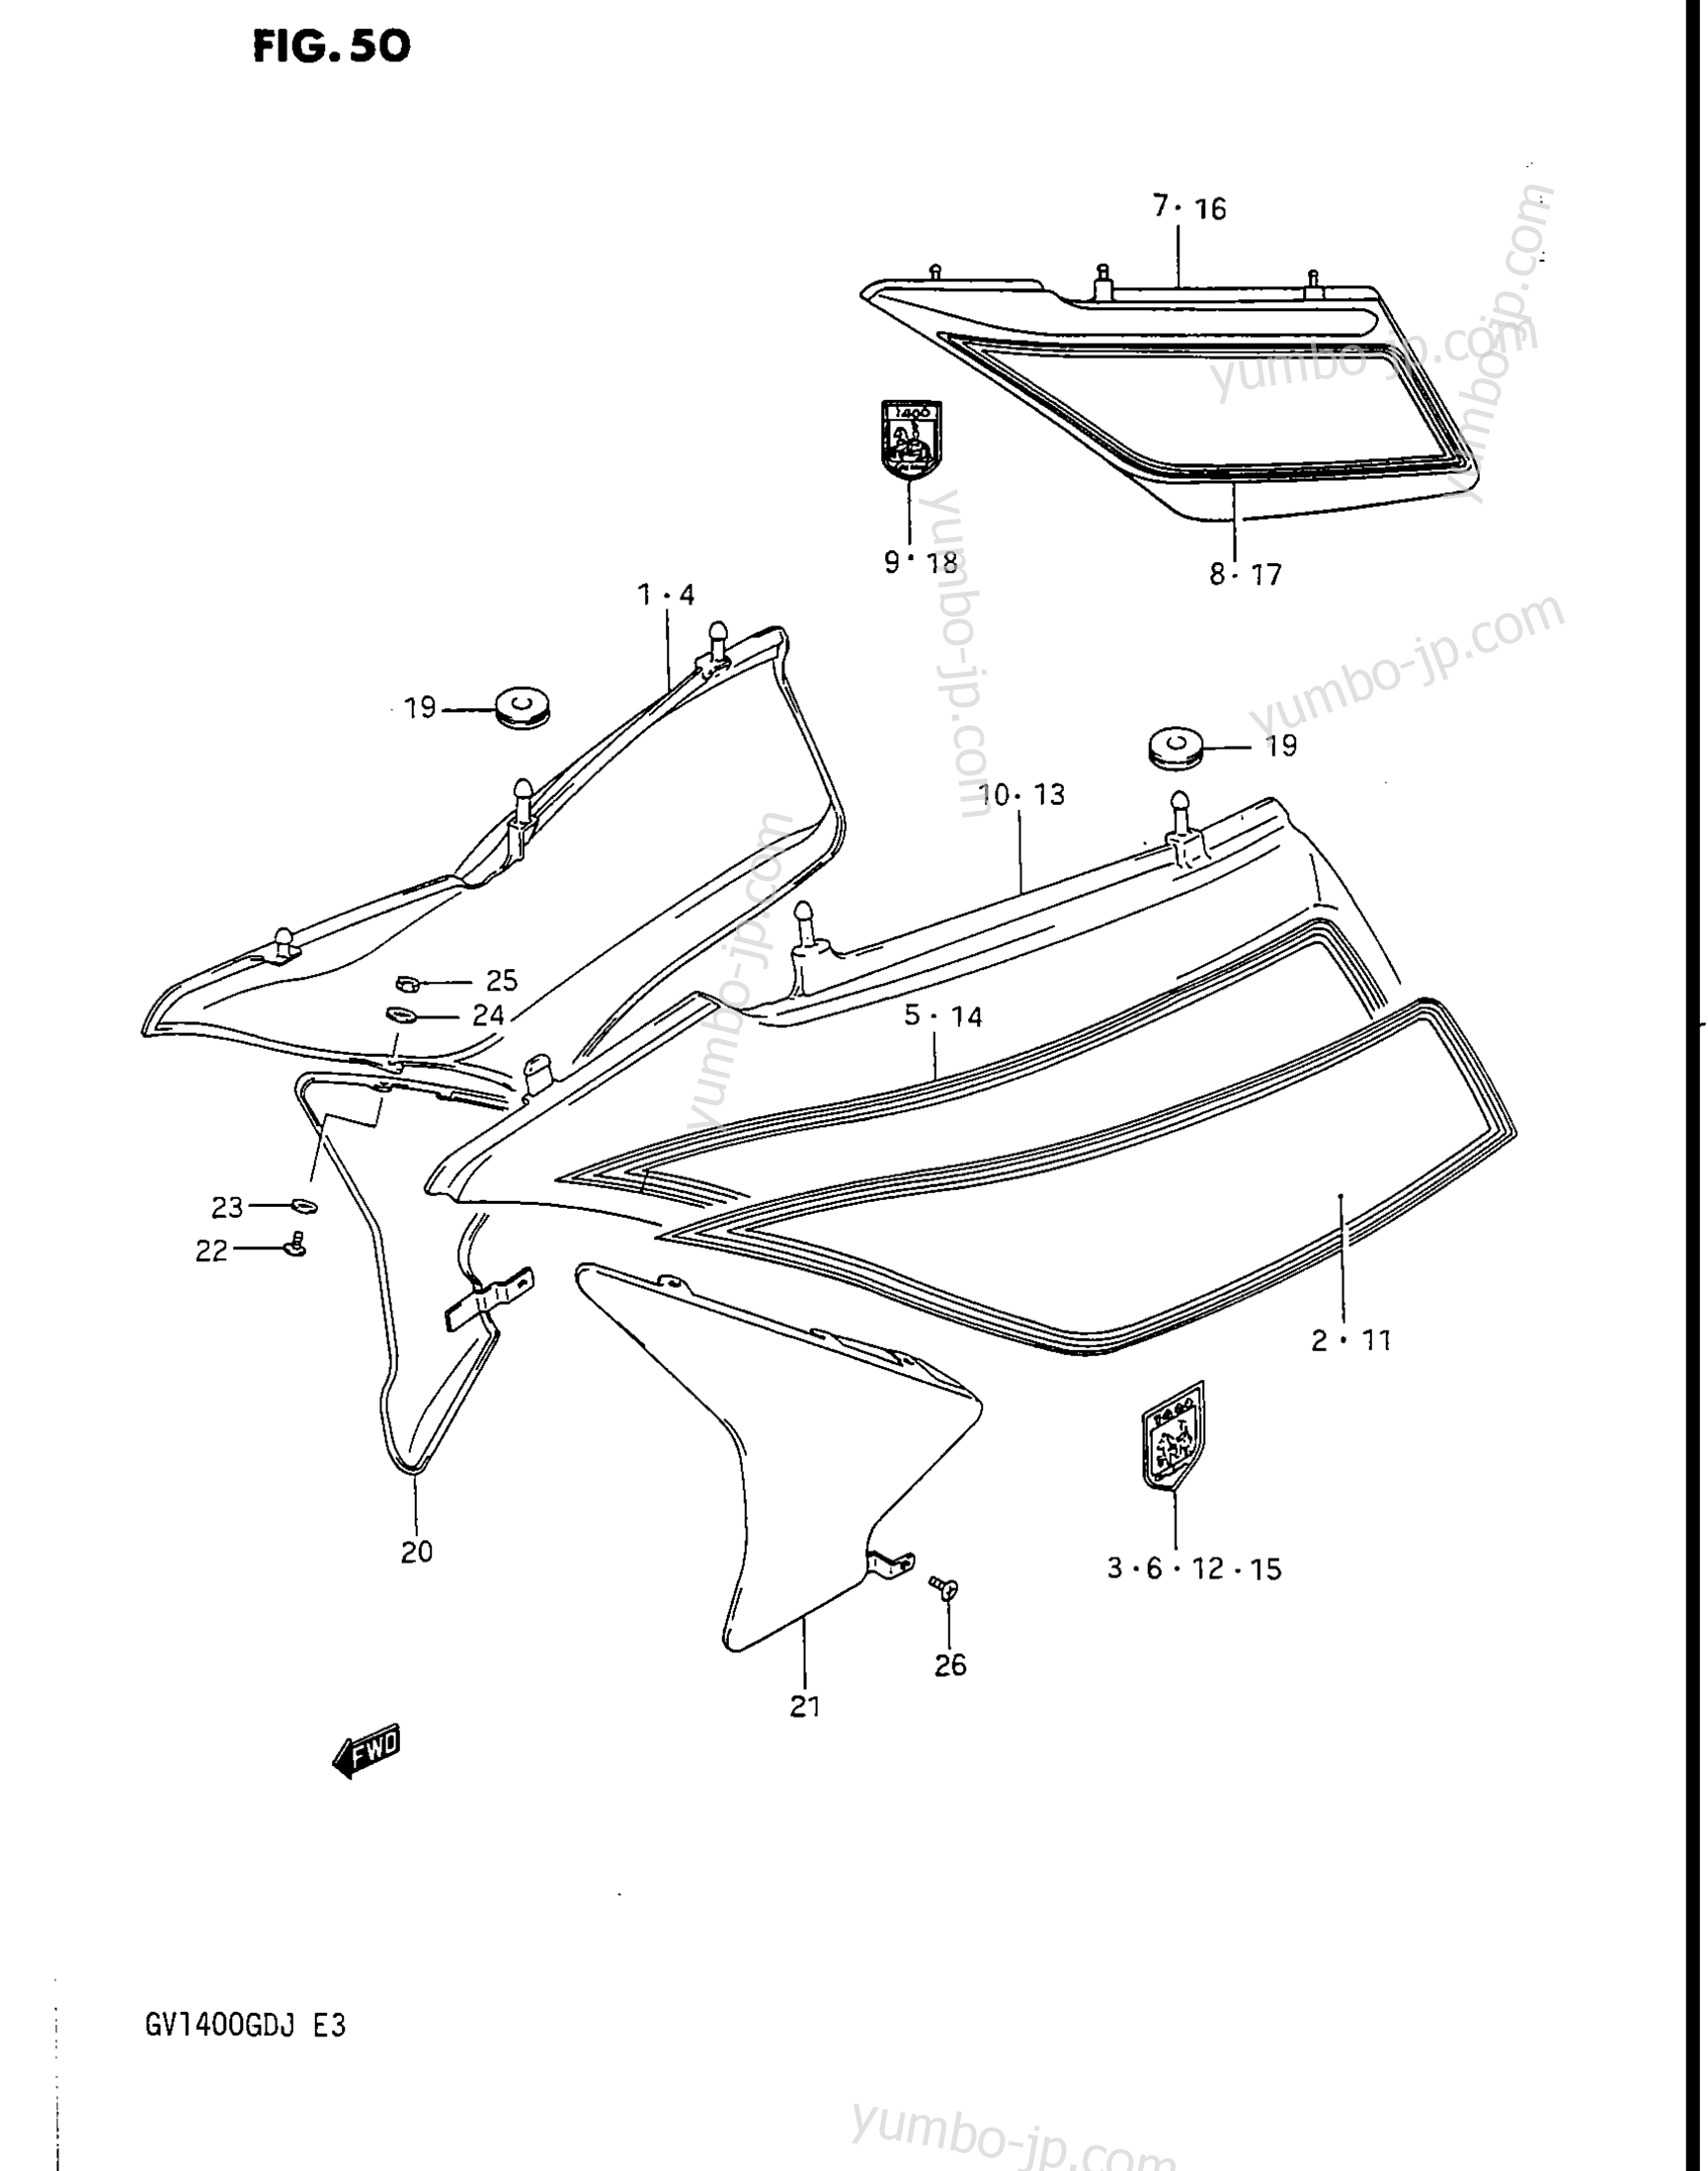 FRAME COVER (MODEL H/J) for motorcycles SUZUKI Cavalcade (GV1400GD) 1988 year